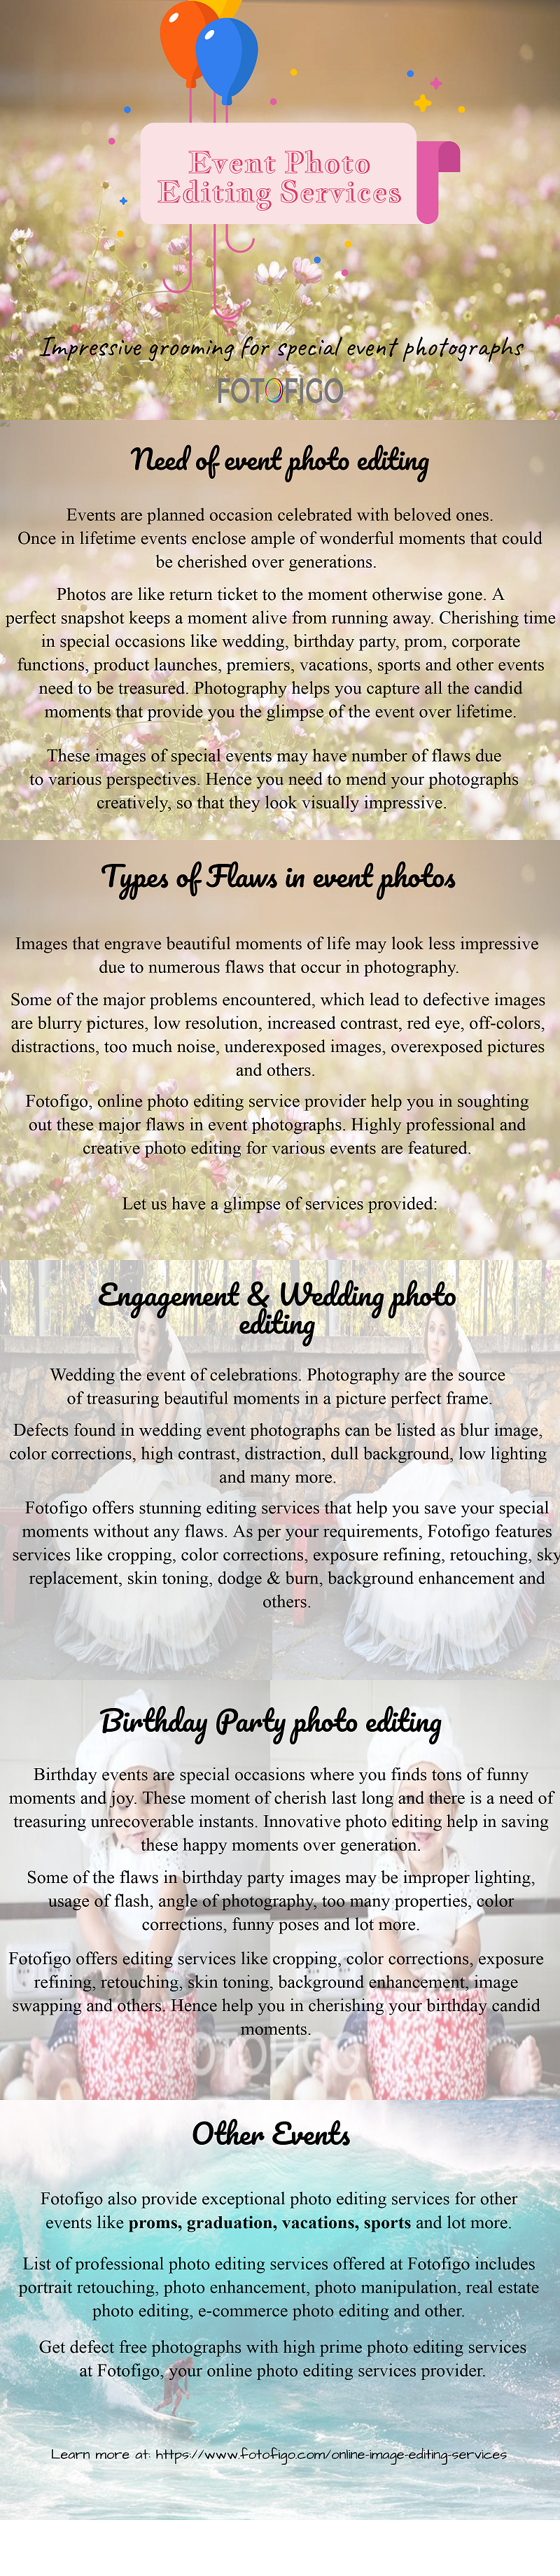 Event Photo editing services